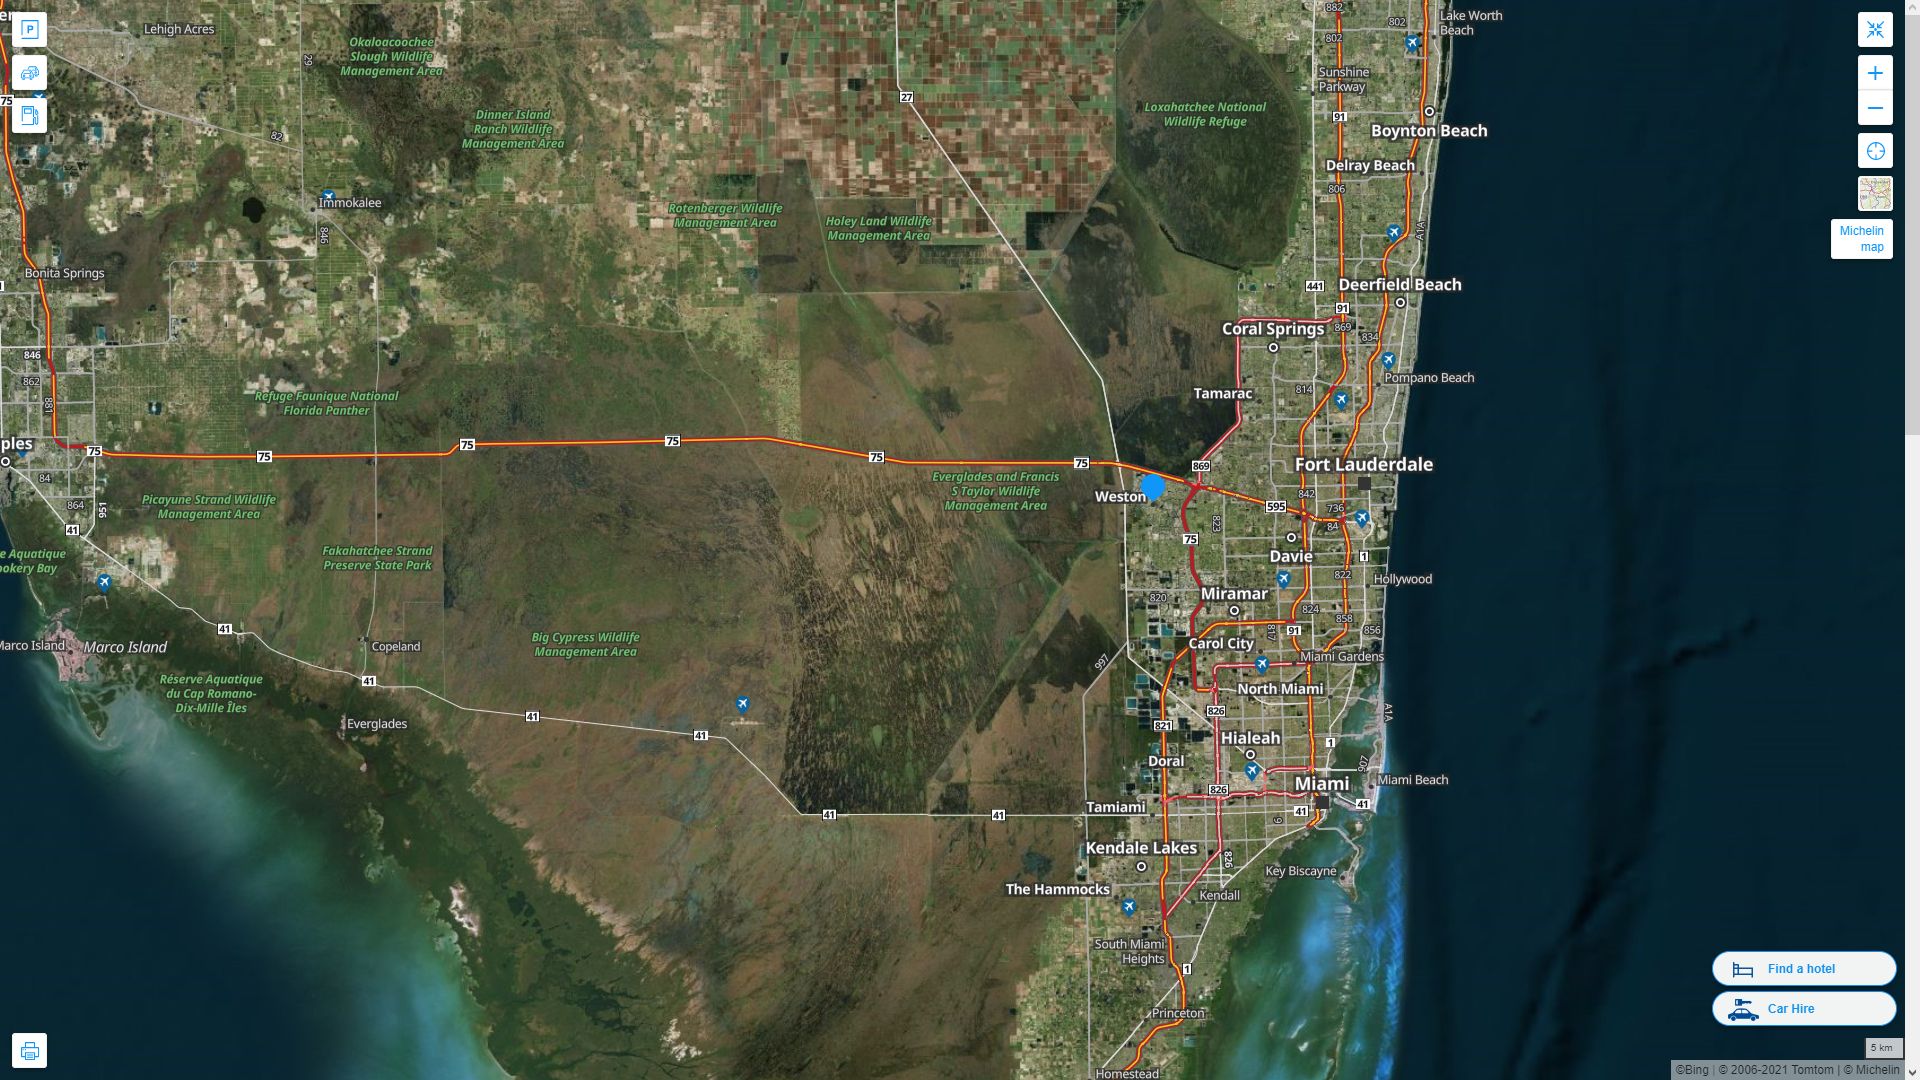 Weston Florida Highway and Road Map with Satellite View